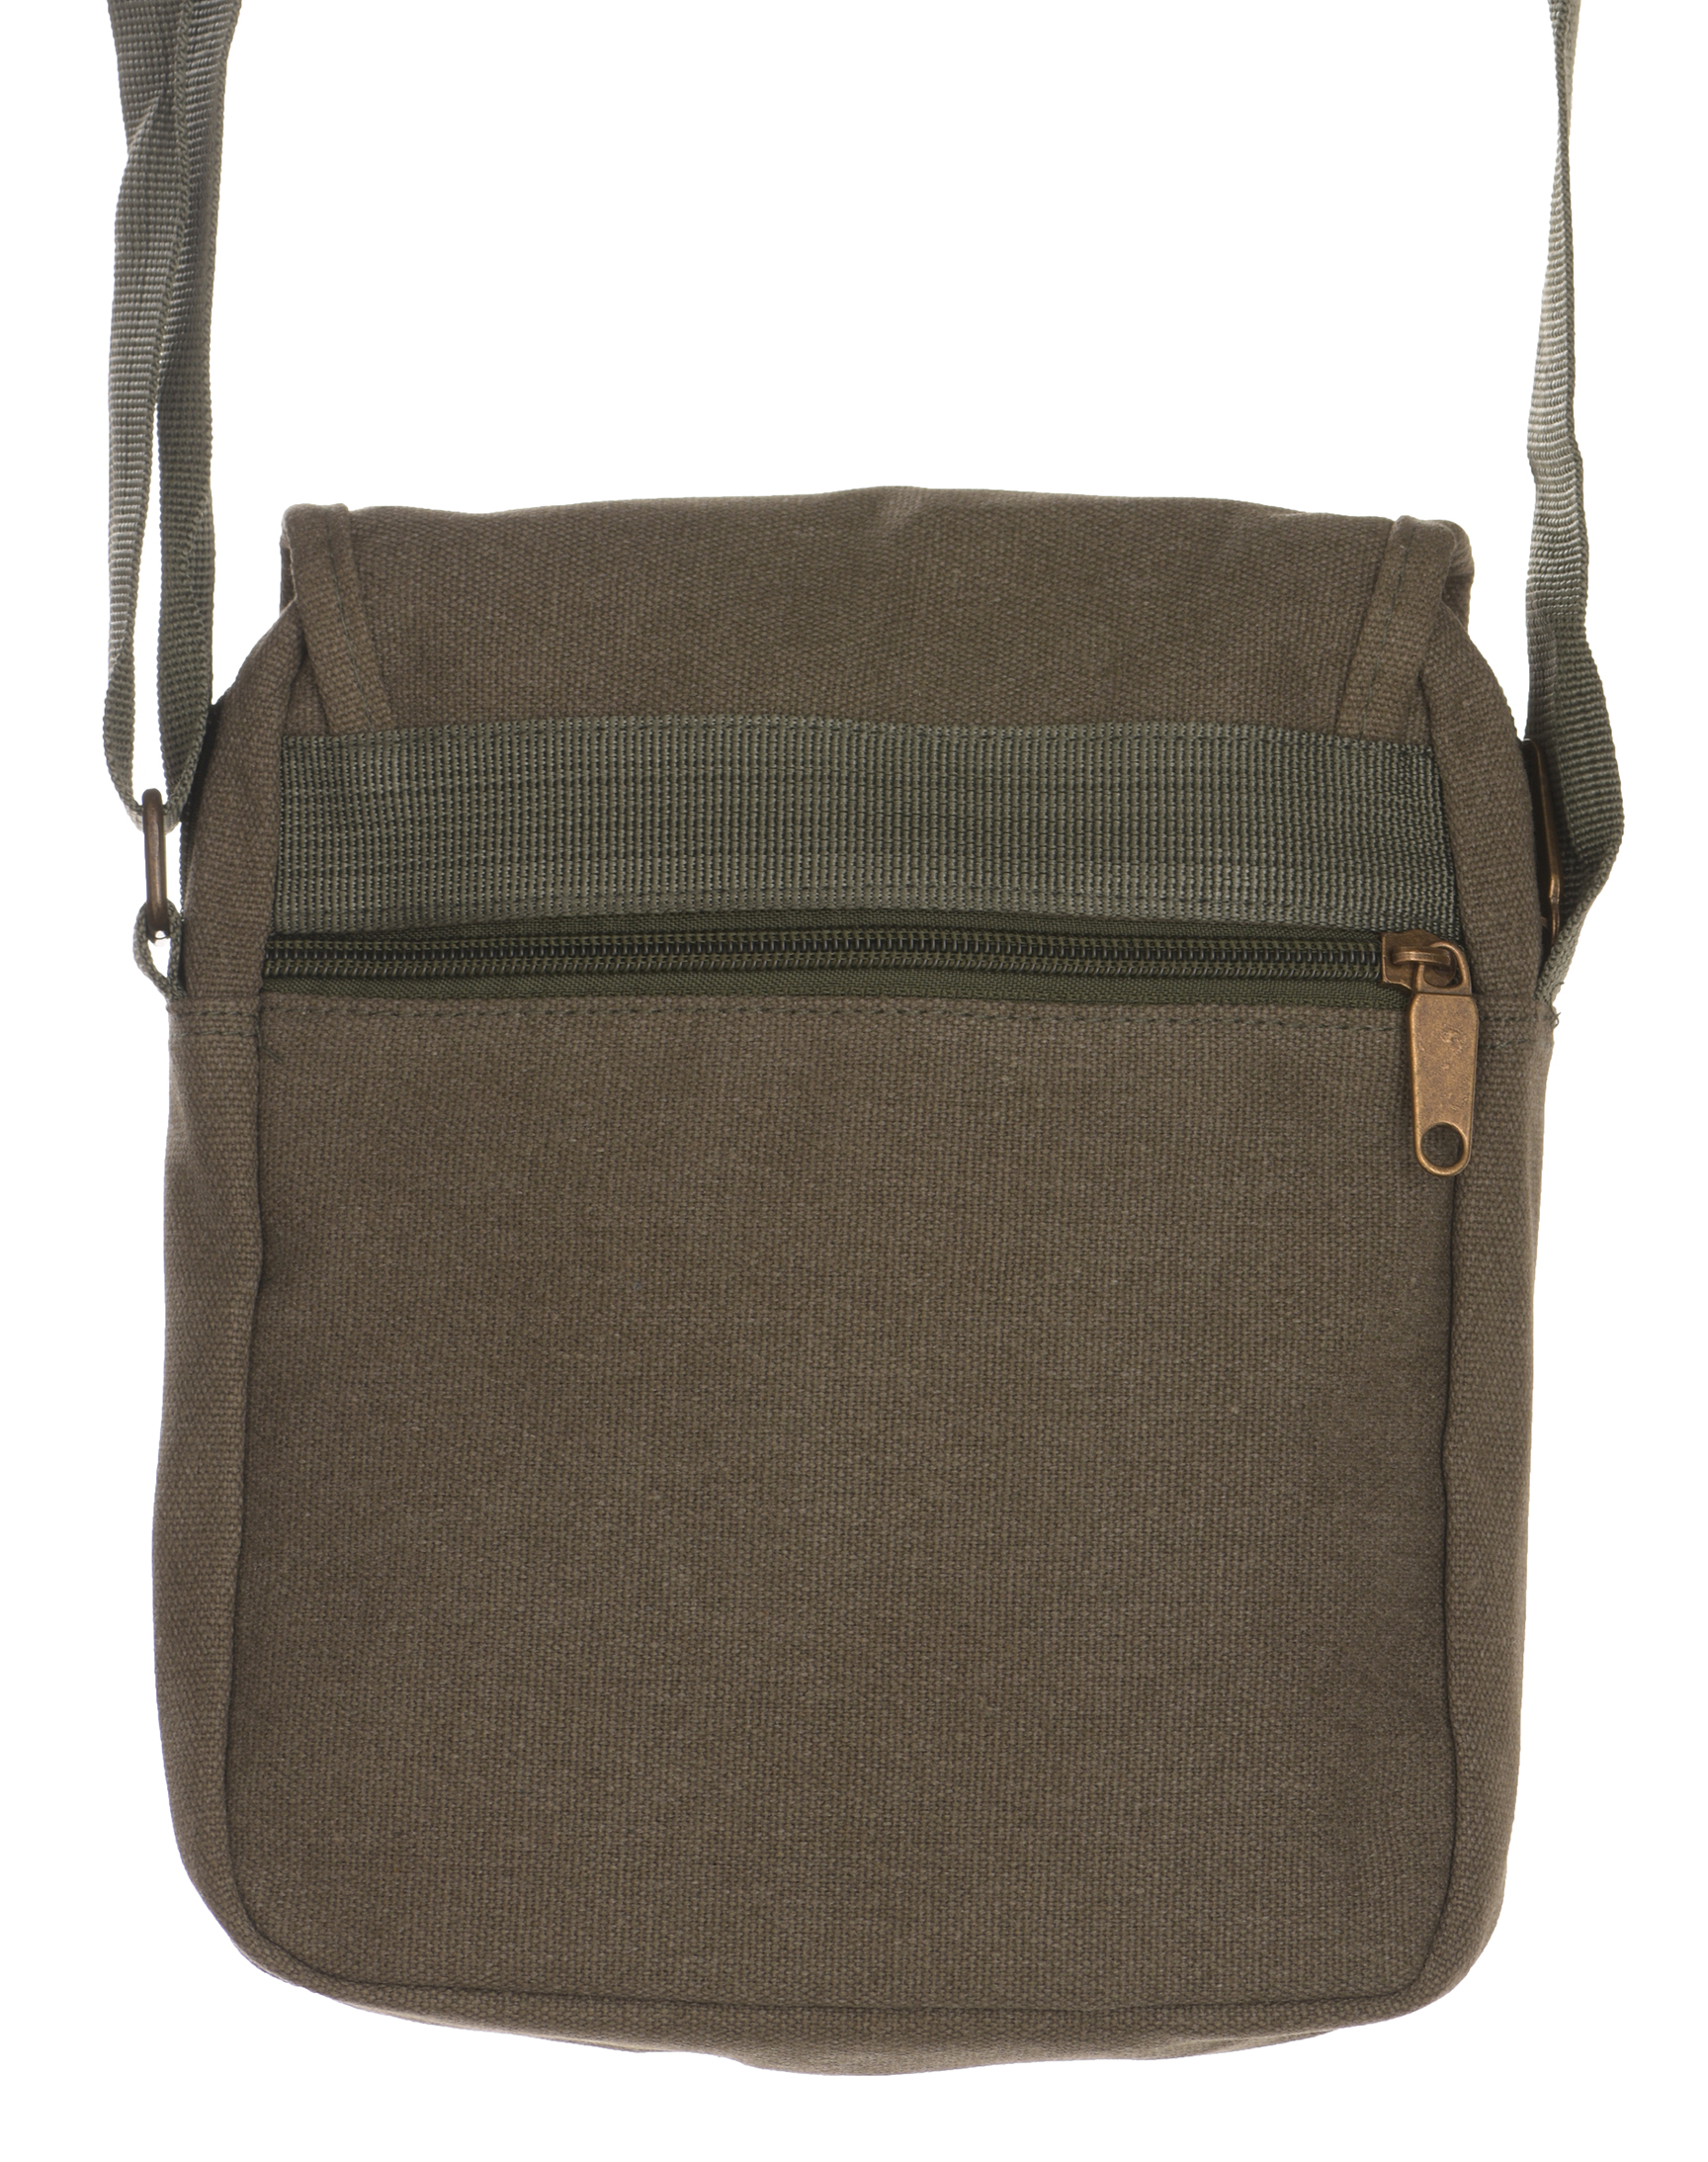 Unisex Travel - Work Canvas Small Messenger Style Shoulder Bag by ...